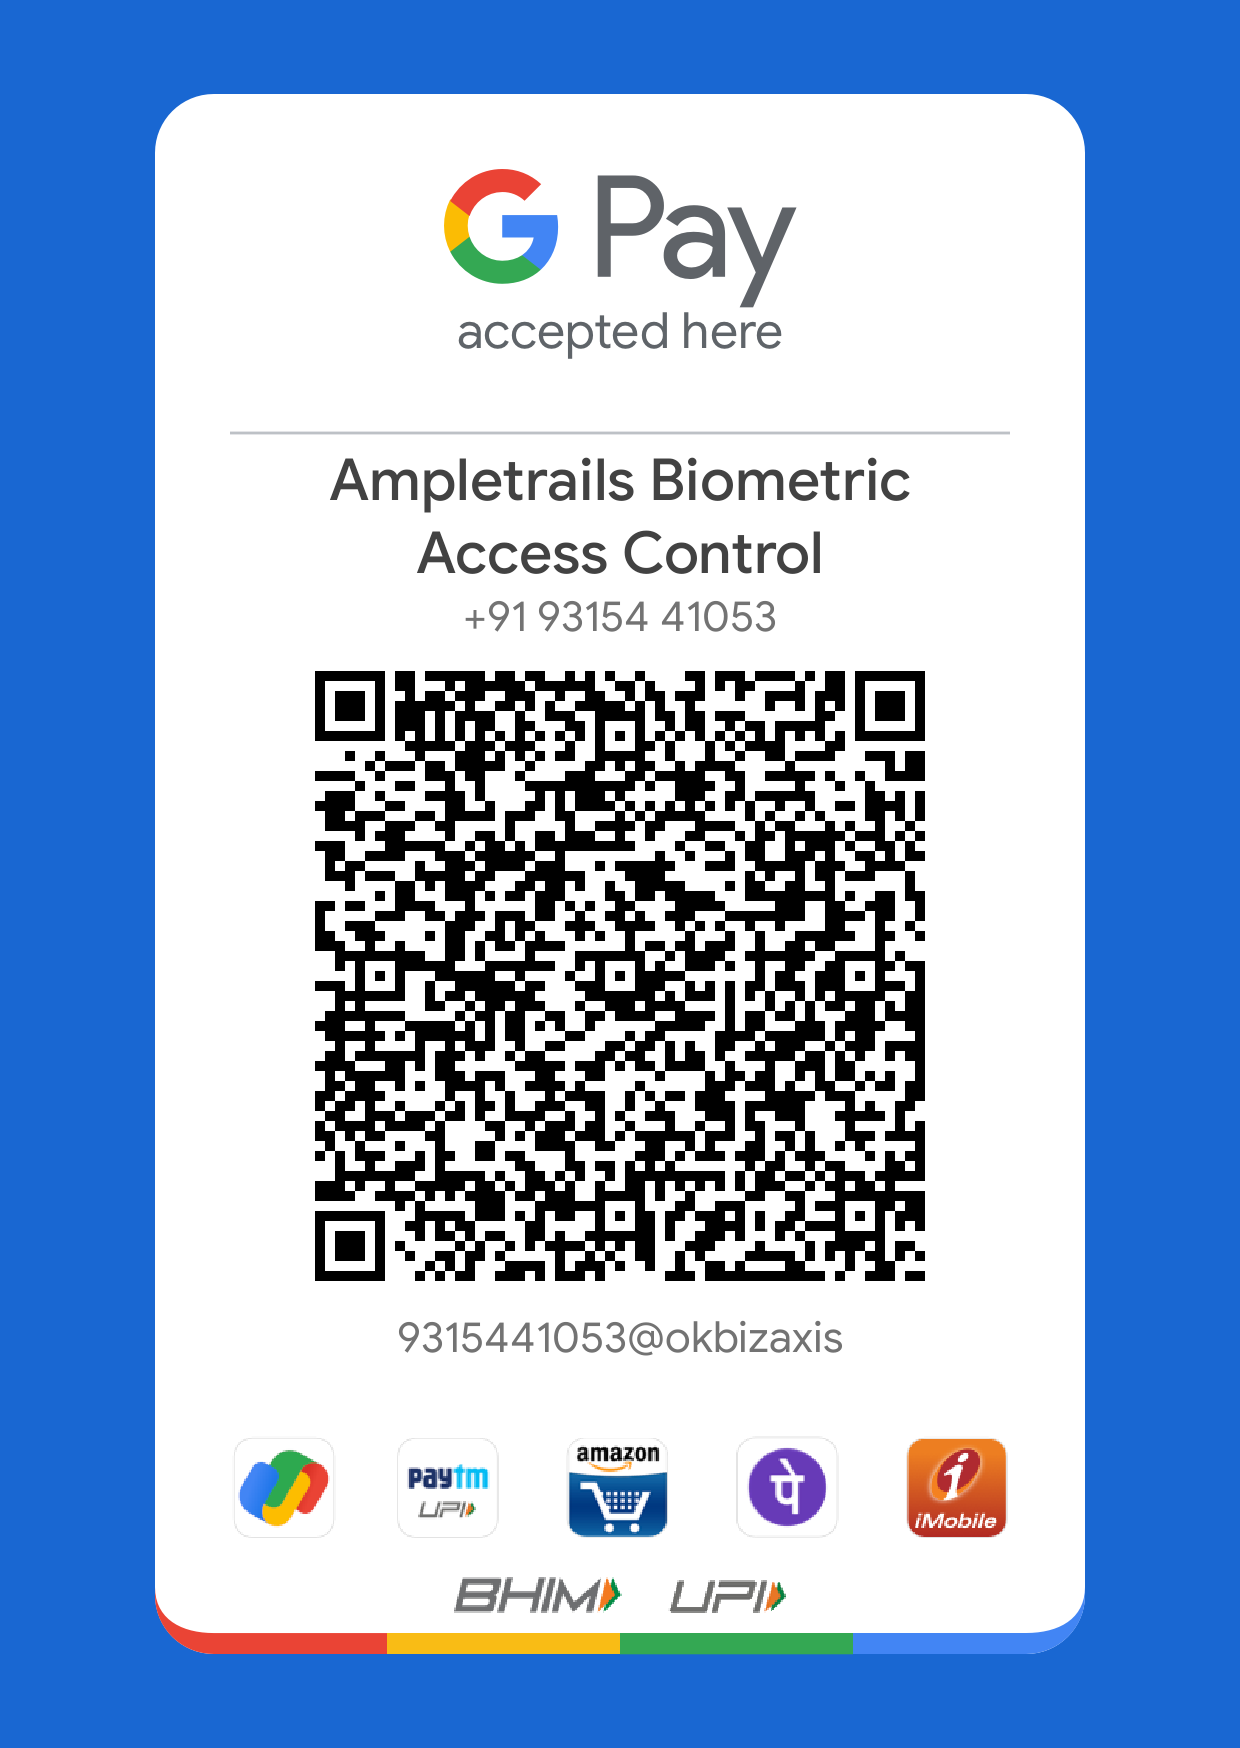 GPay for AmpleTrails